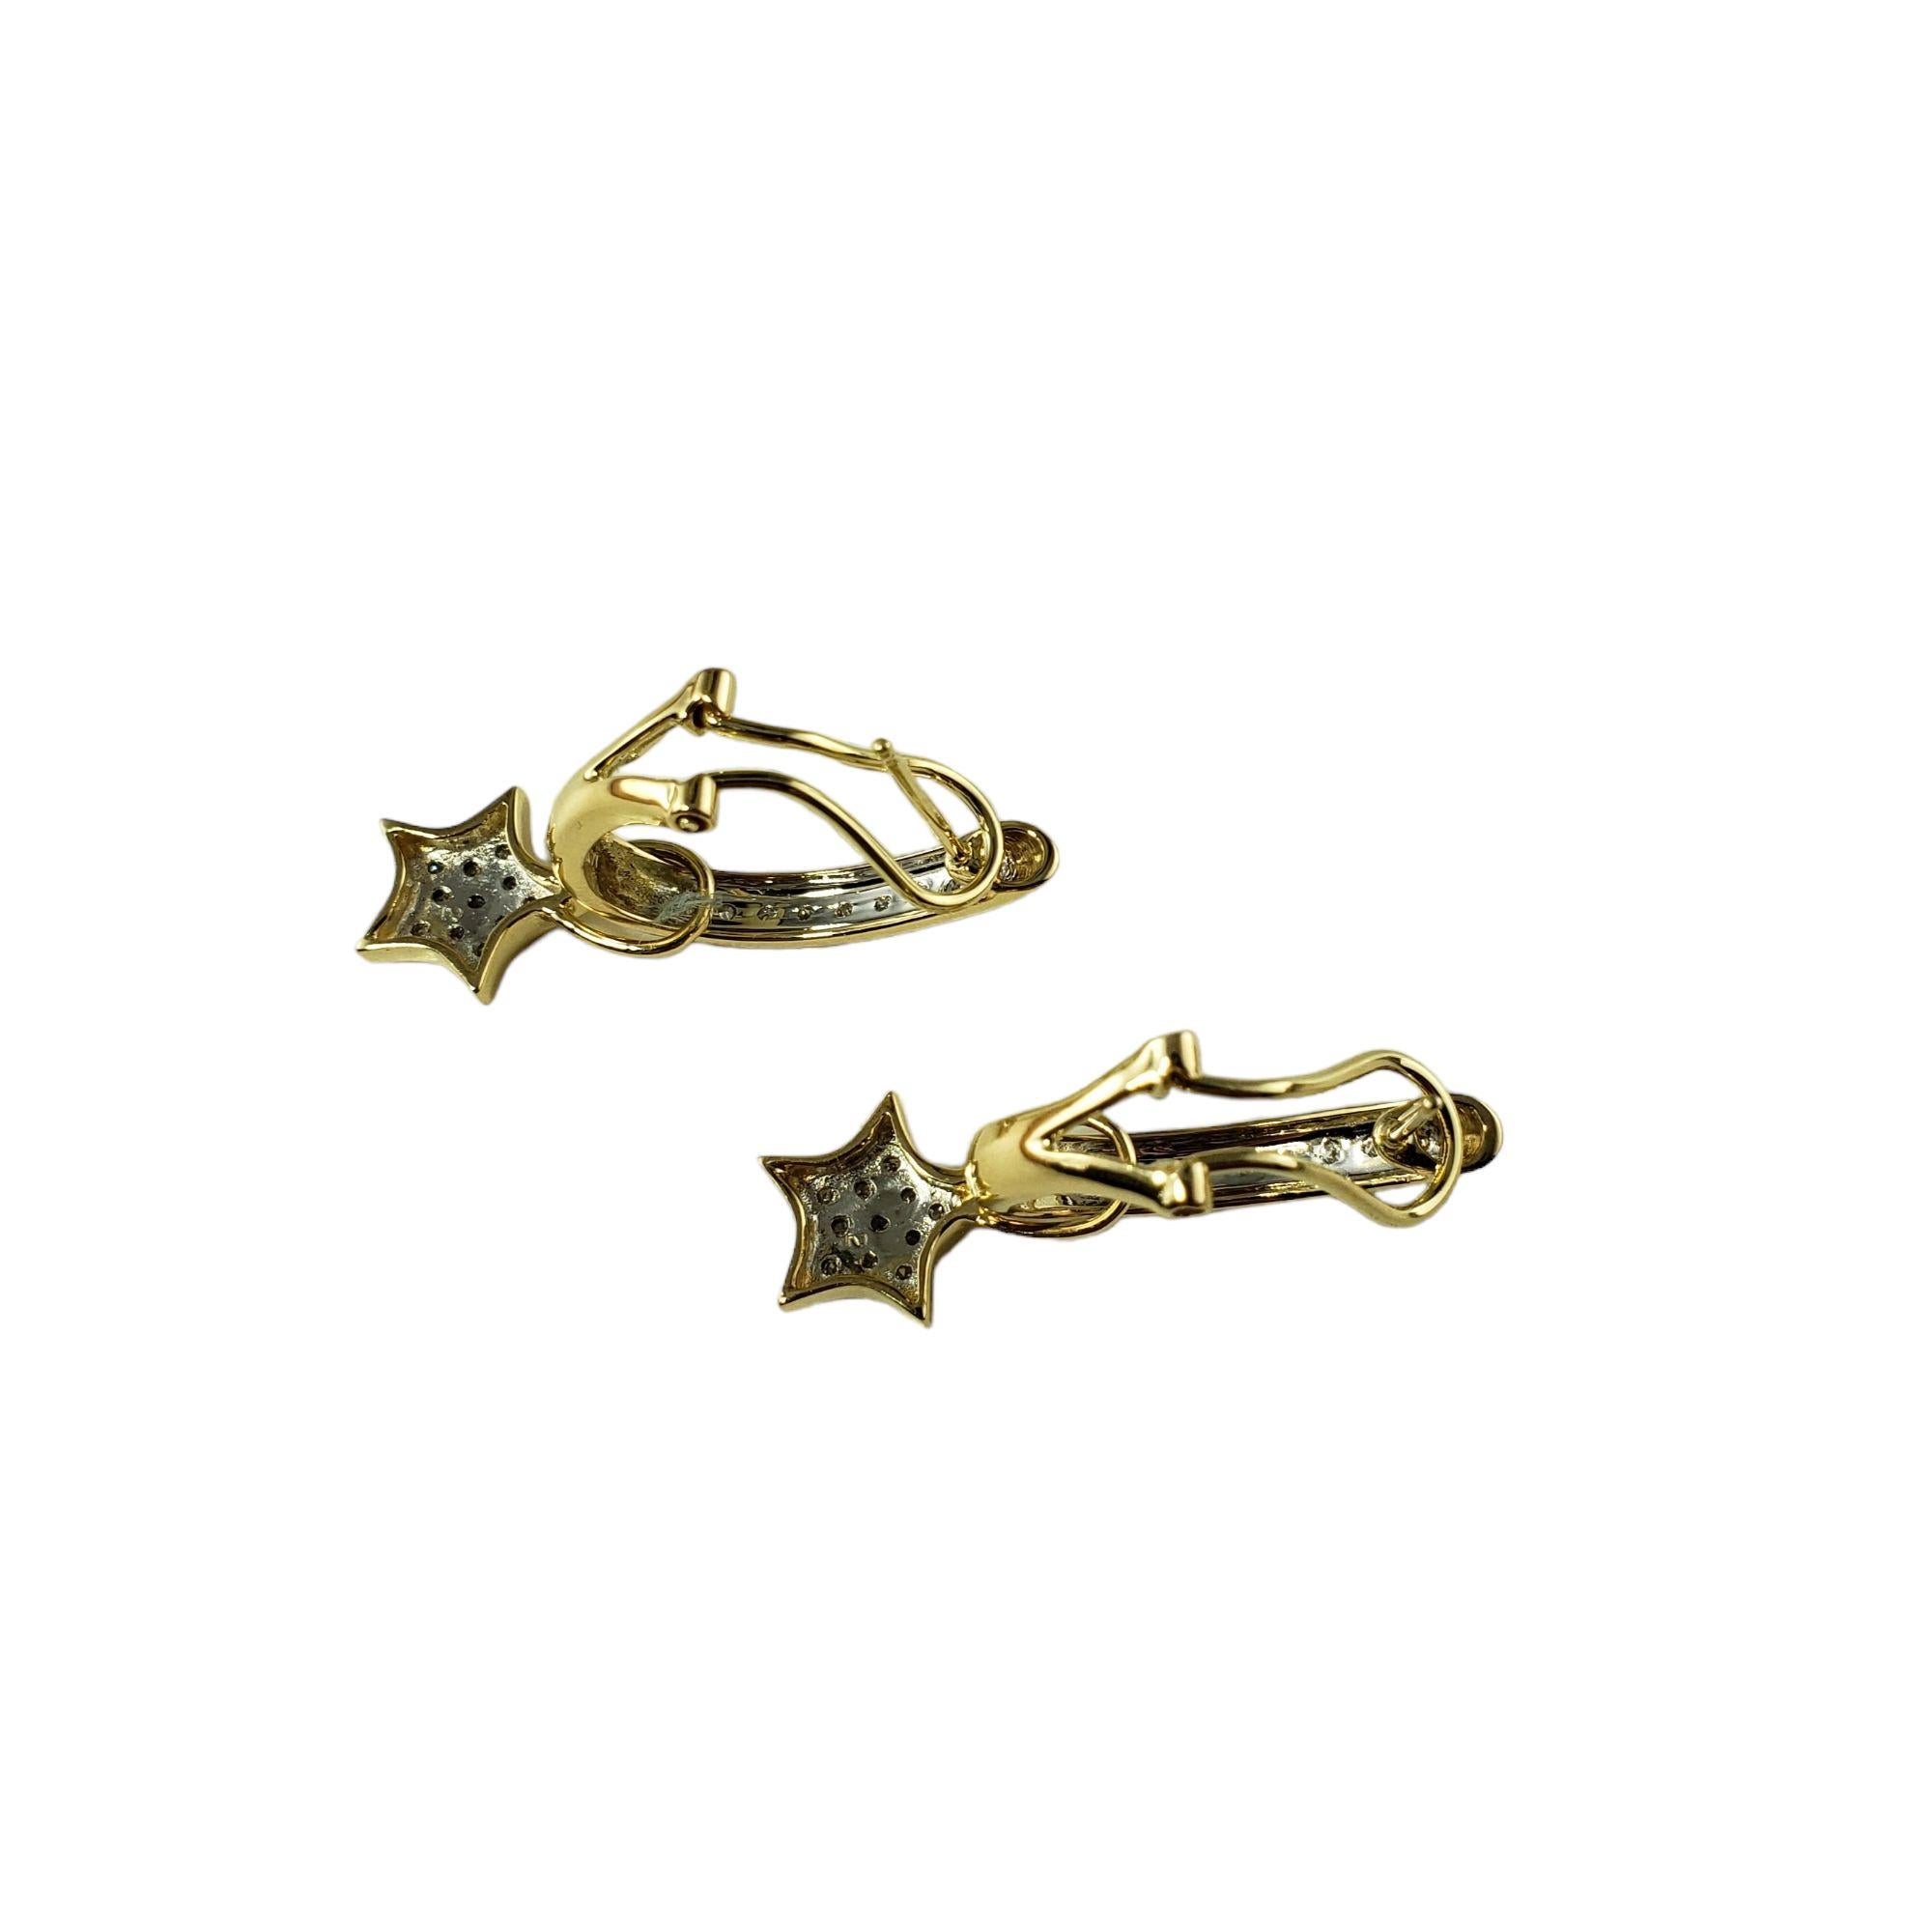 Vintage 14 Karat Yellow Gold and Diamond Cuff Star Earrings-

These lovely cuff earrings feature a dangling star and each are accented with 20 round brilliant cut diamonds set in 14K yellow gold. Omega back closures.

Approximate total diamond